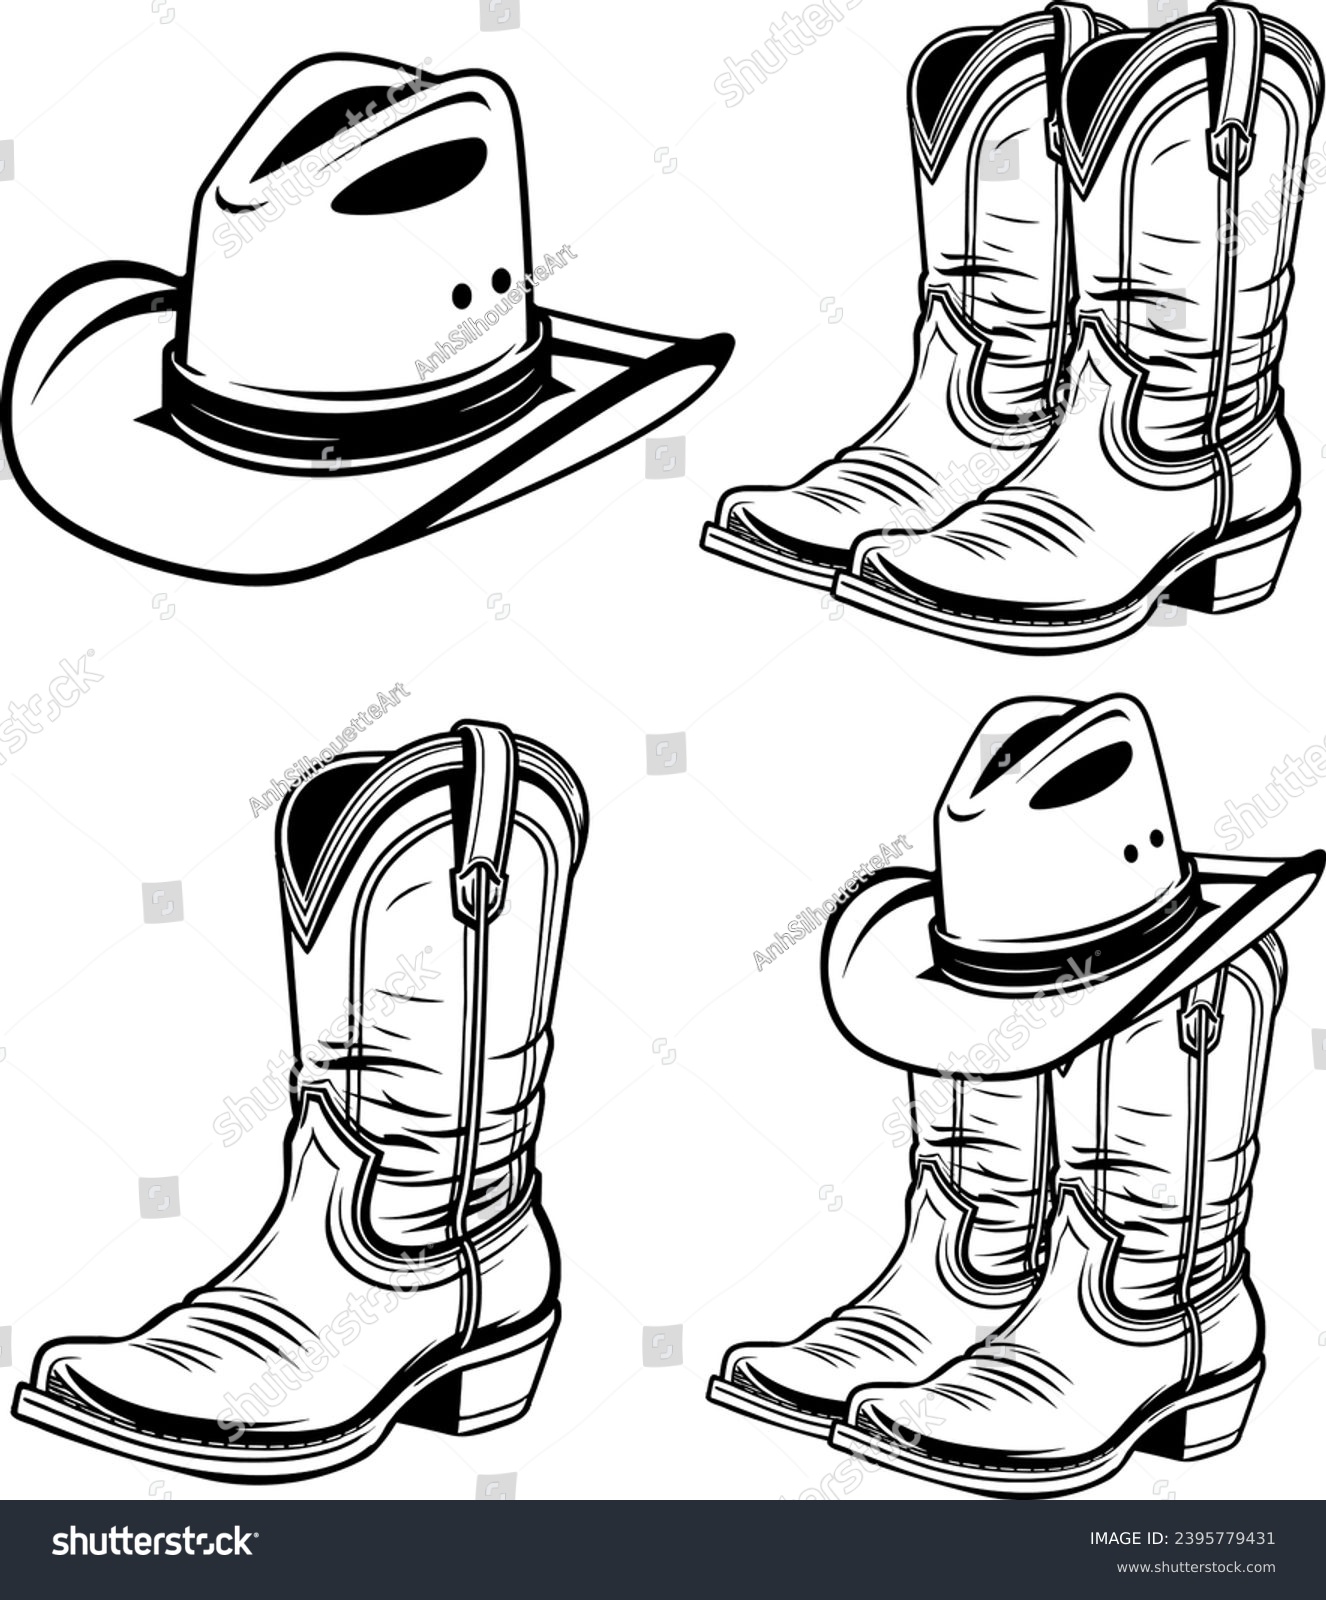 SVG of Cowboy Boots Bundle, Cowboy Boots Hand-Drawn, Cowboy Hat, Western Boots, Boots Silhouette, Rodeo, Ranch  svg